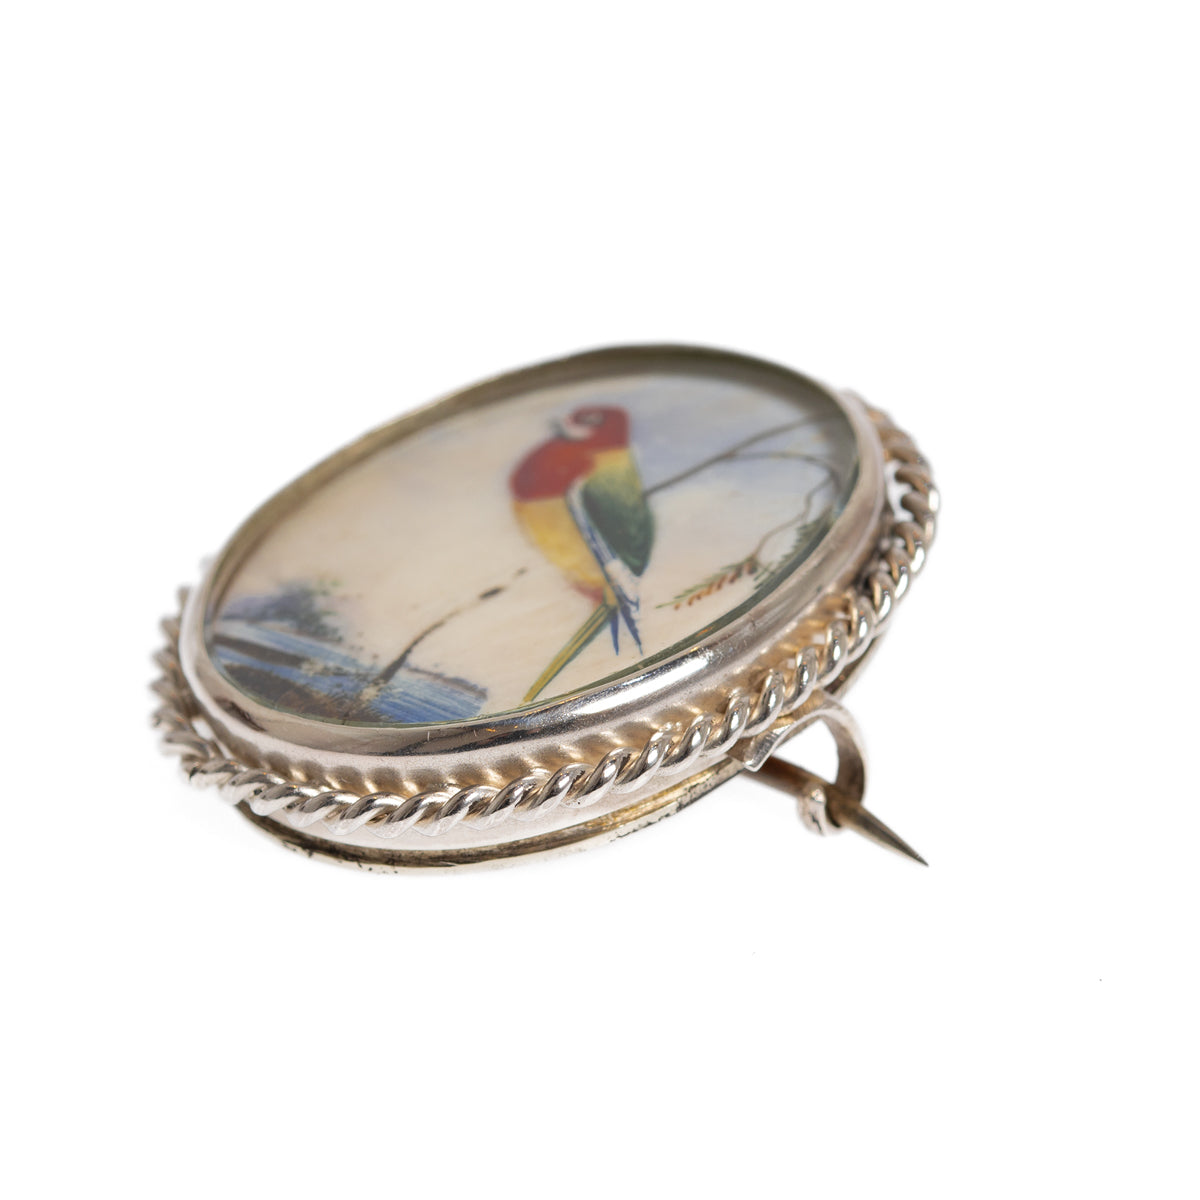 Antique Victorian Silver Brooch With Hand Painted Exotic Bird Miniature c.1880 (Code A1010)